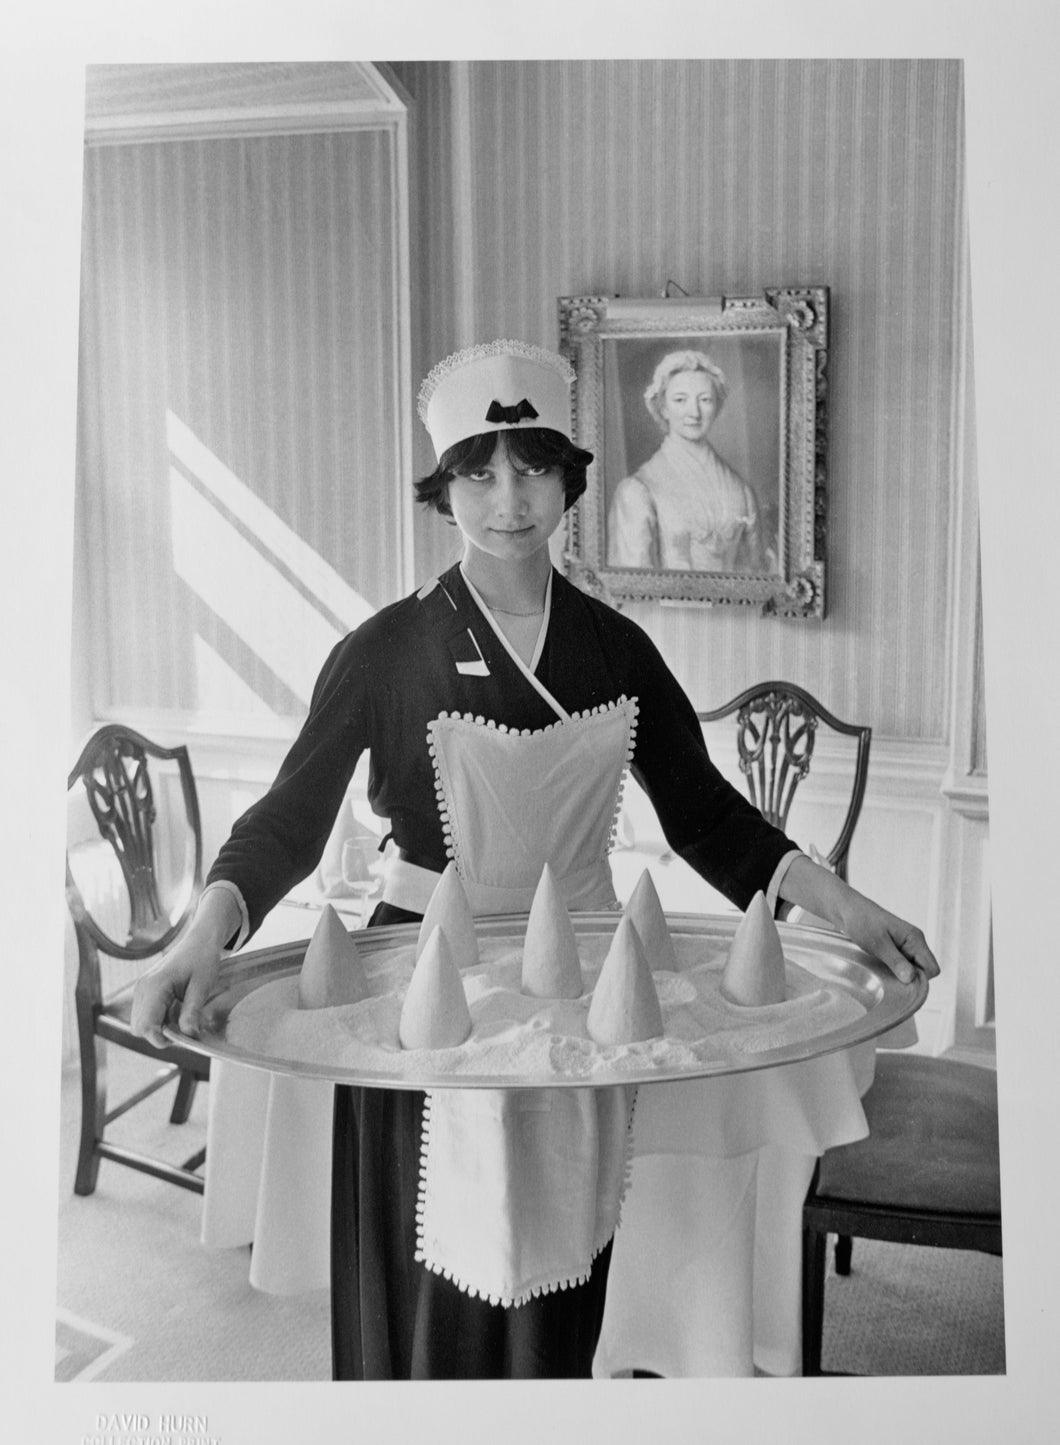 Untitled, Portrait Photography of Woman Dressed as French Maid by David Hurn